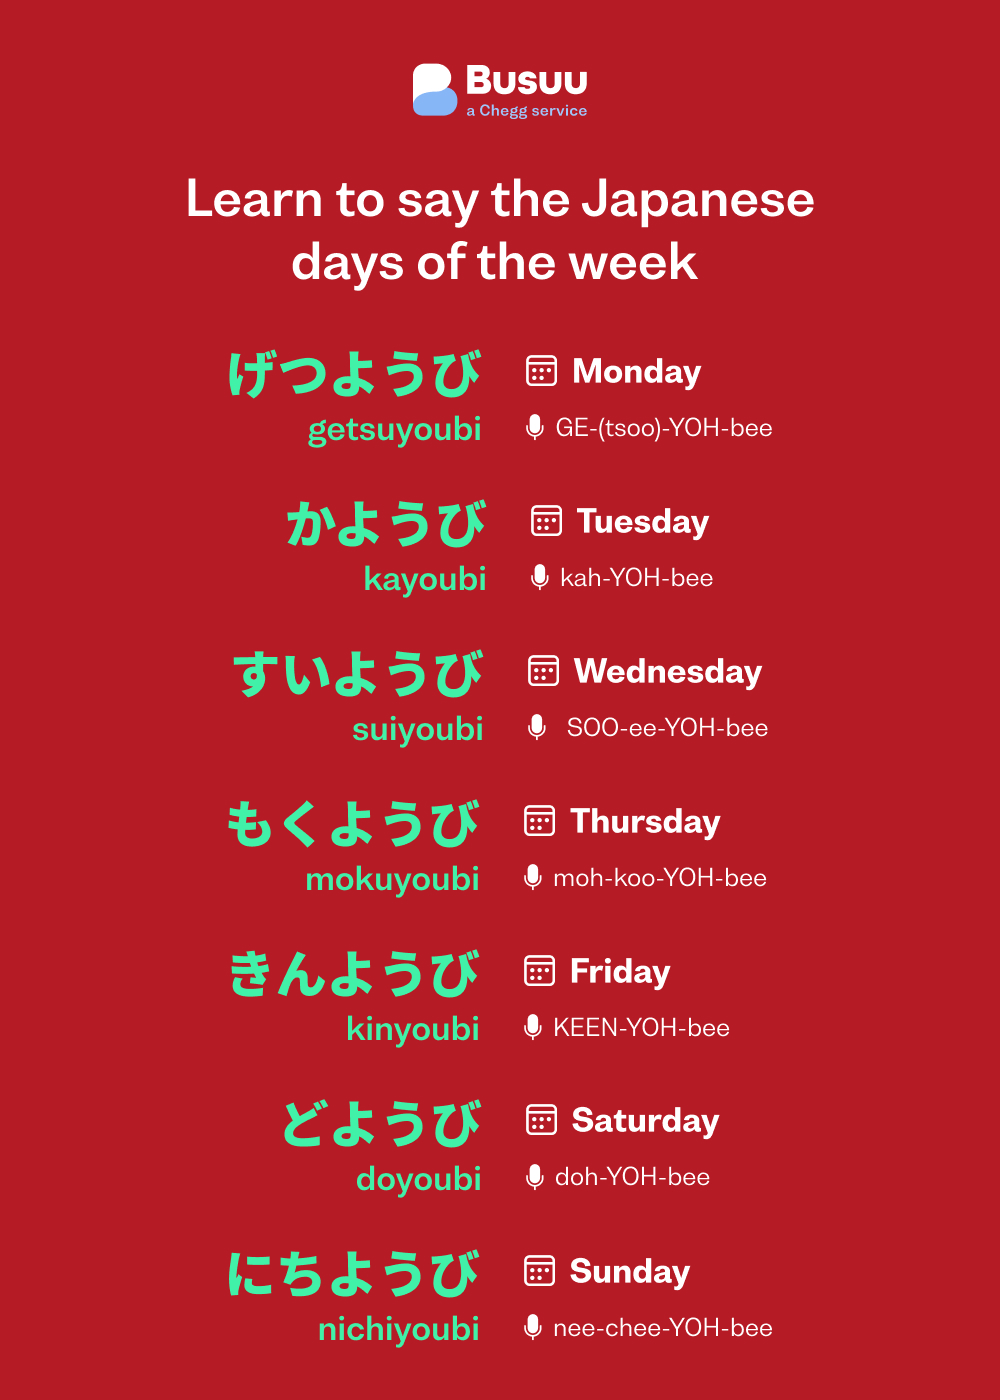 Japanese days of the week chart, courtesy of language-learning app Busuu's Japanese days of the week guide